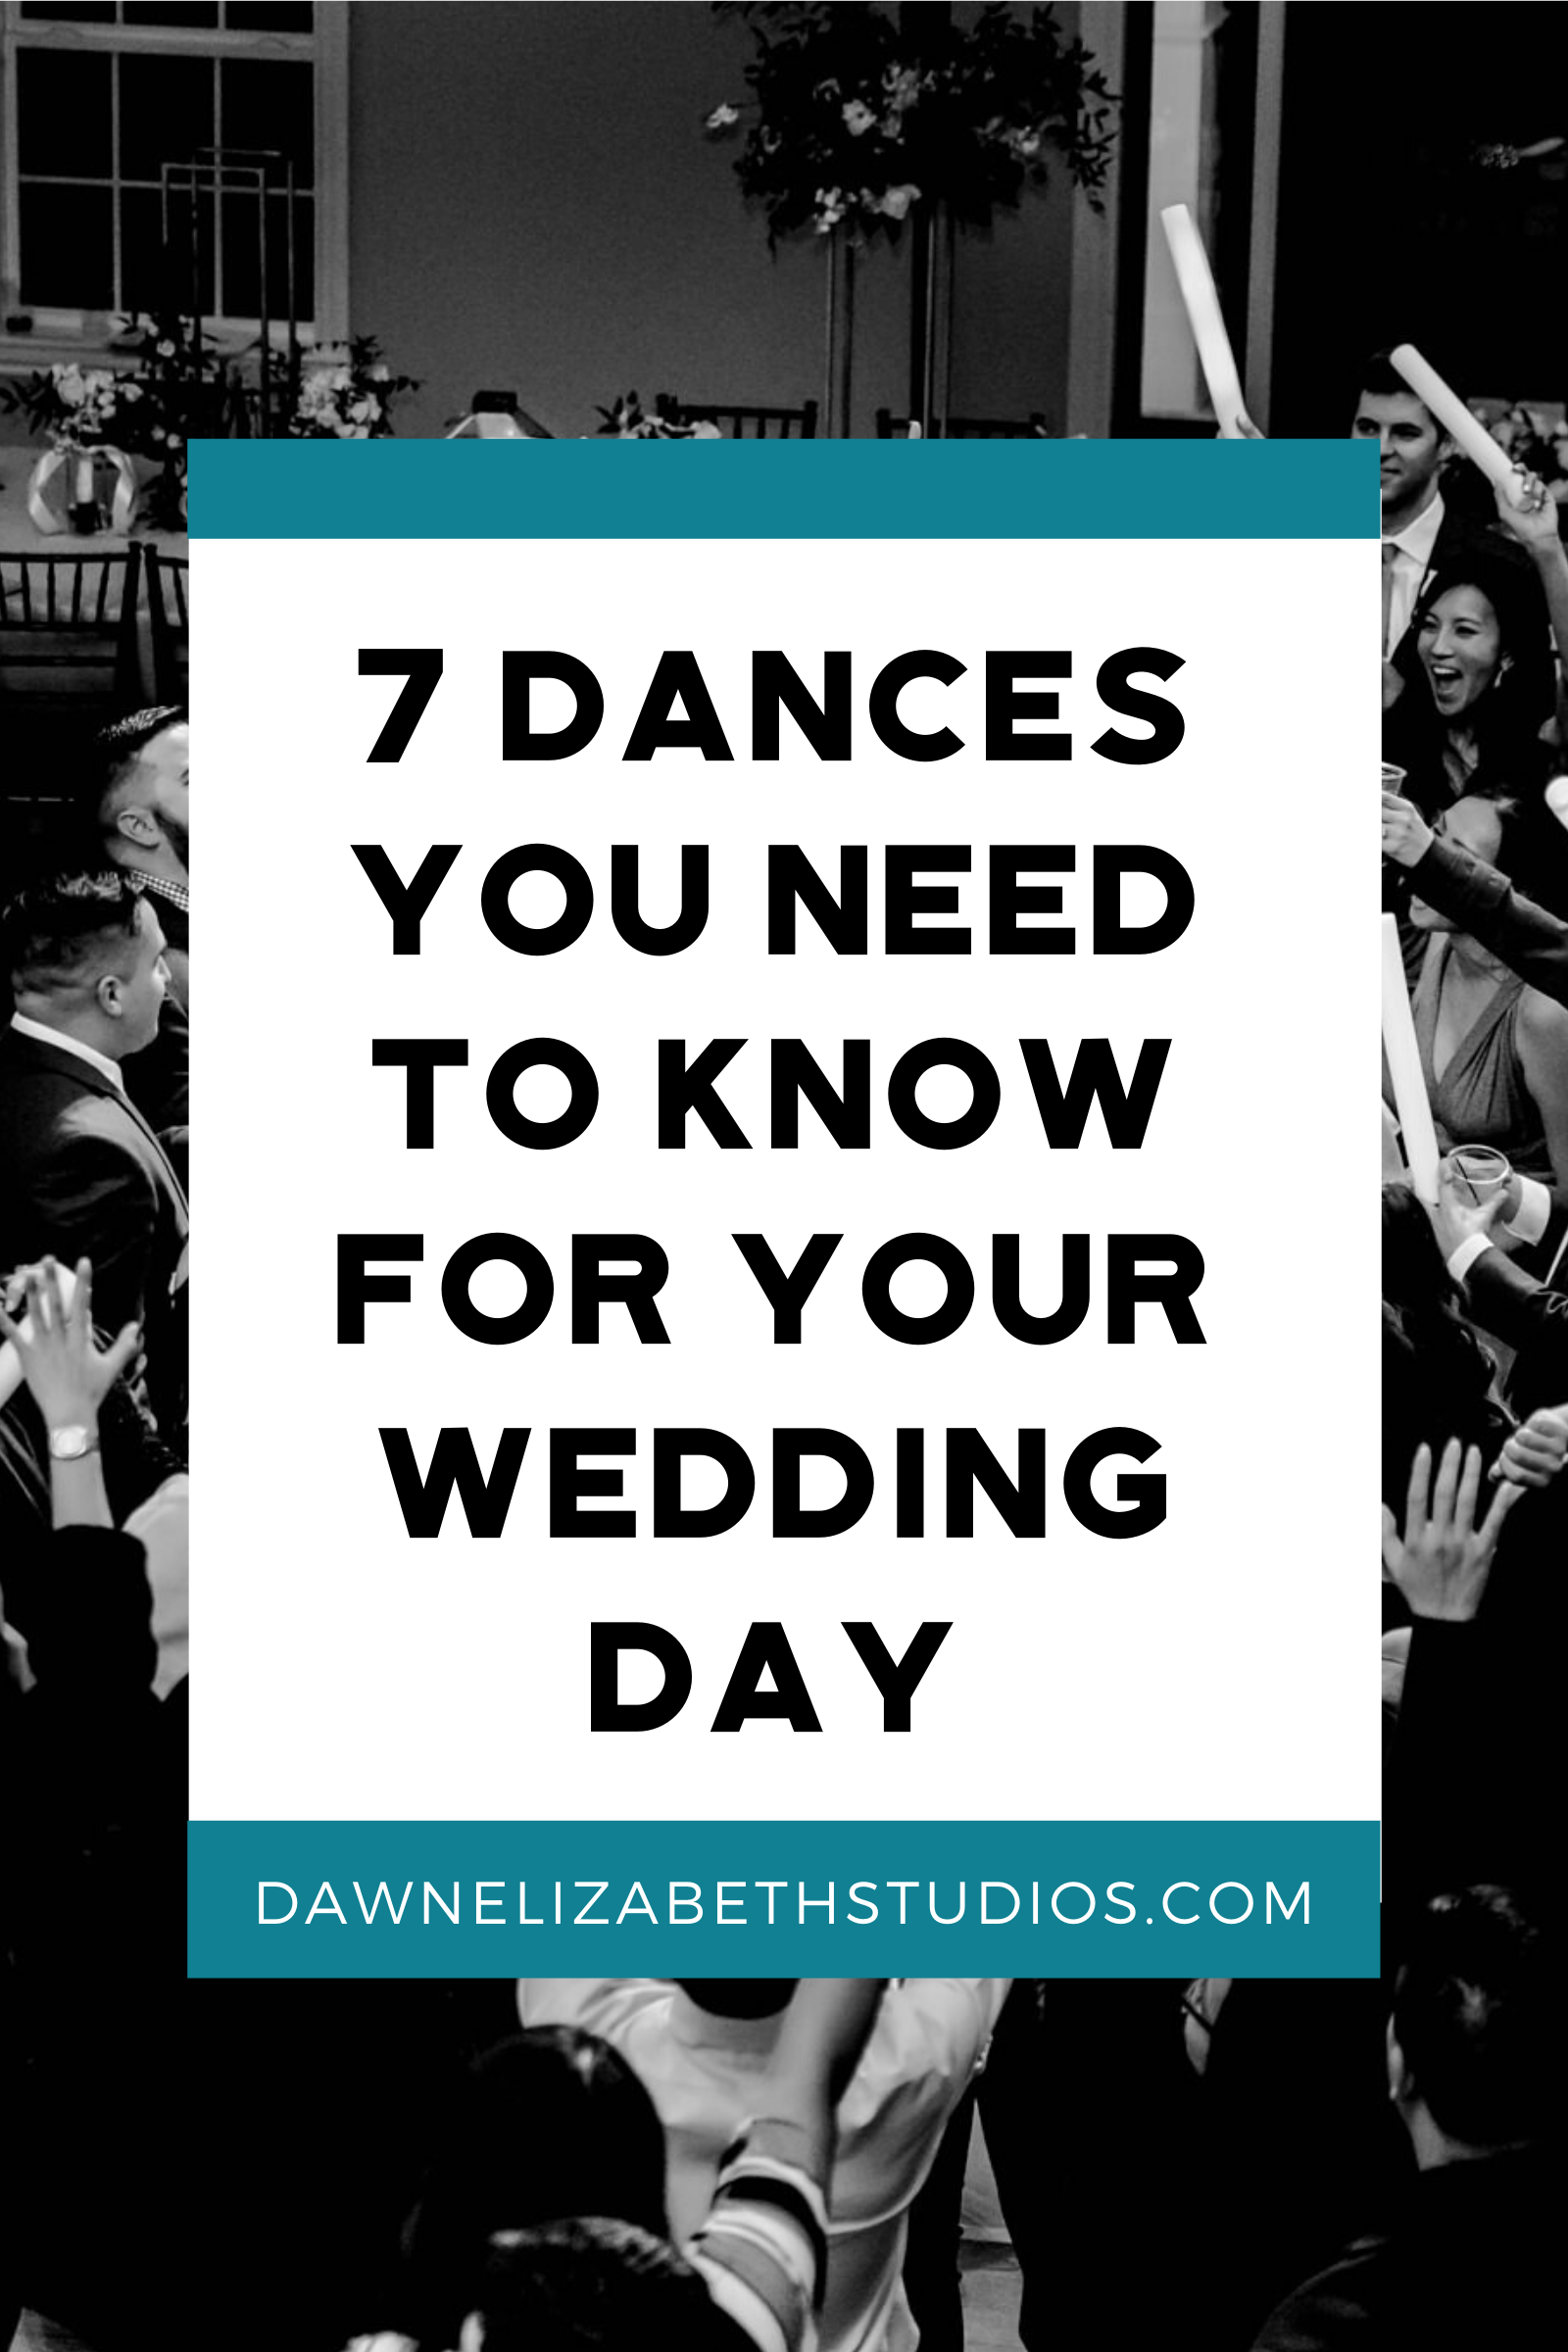 7 Dances You Need to Know For Your Wedding Day